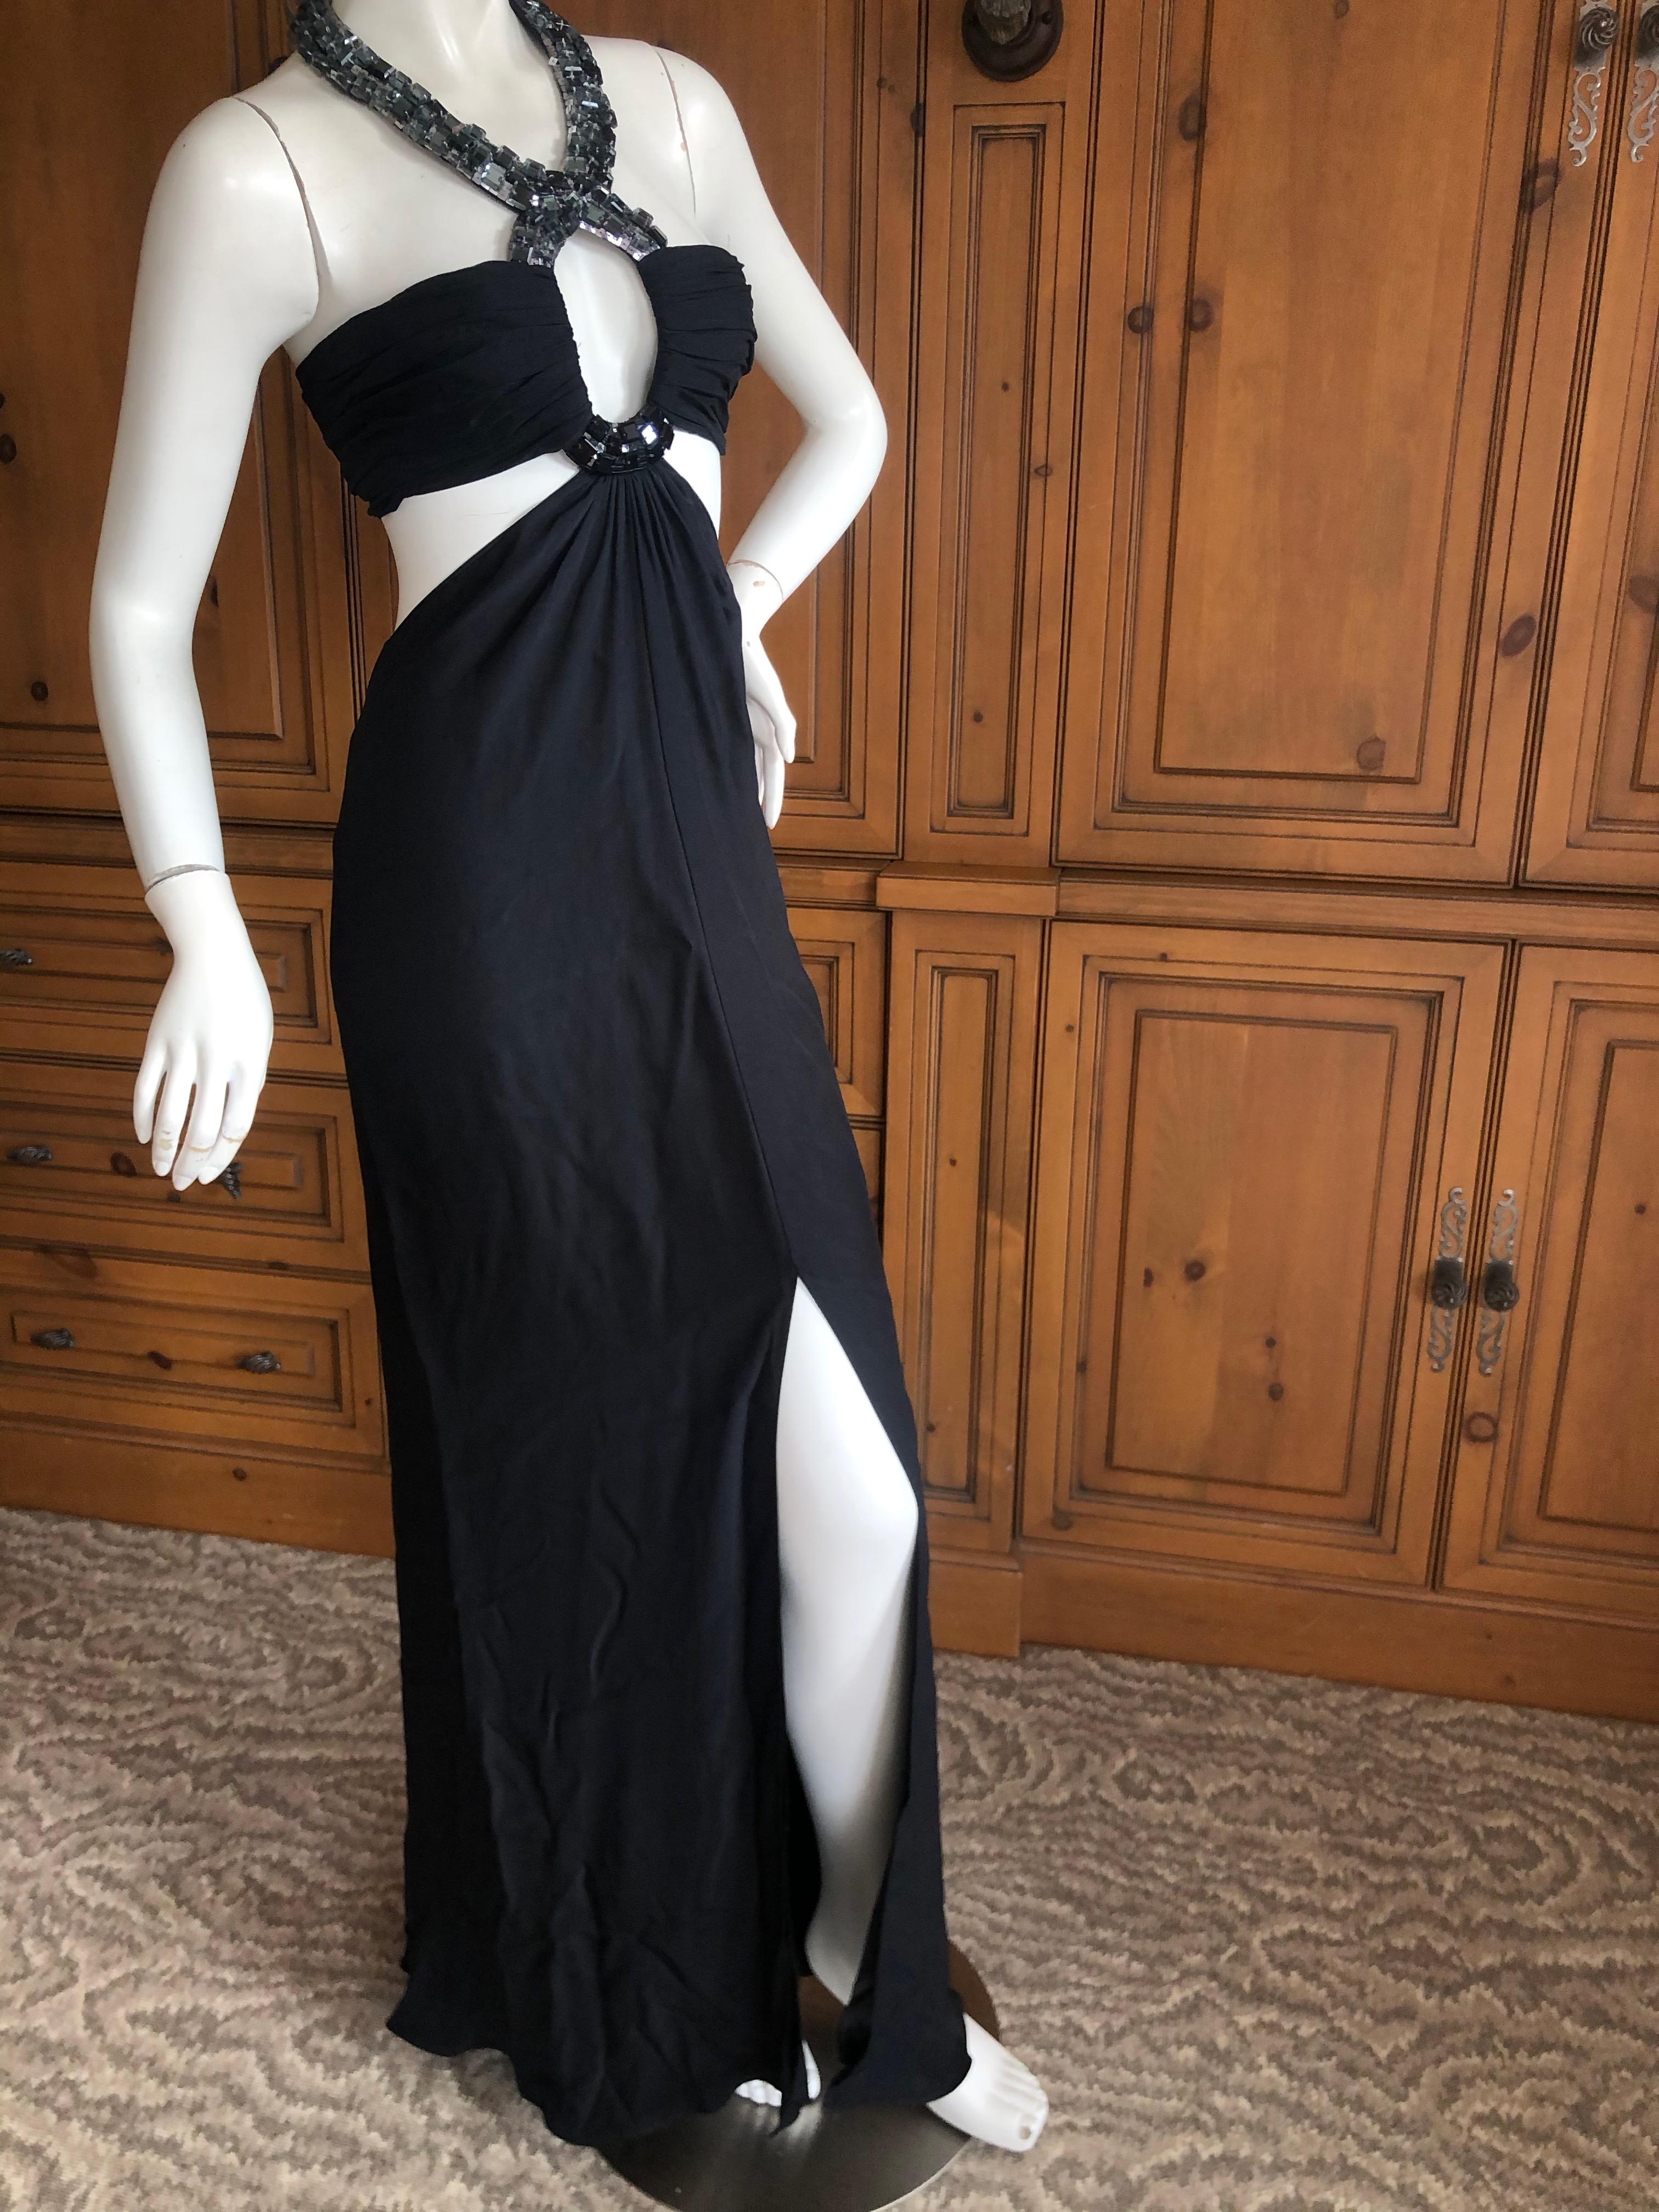 Azzaro Black Cut Out Evening Dress with Bold Crystal Jewel Details For Sale 3